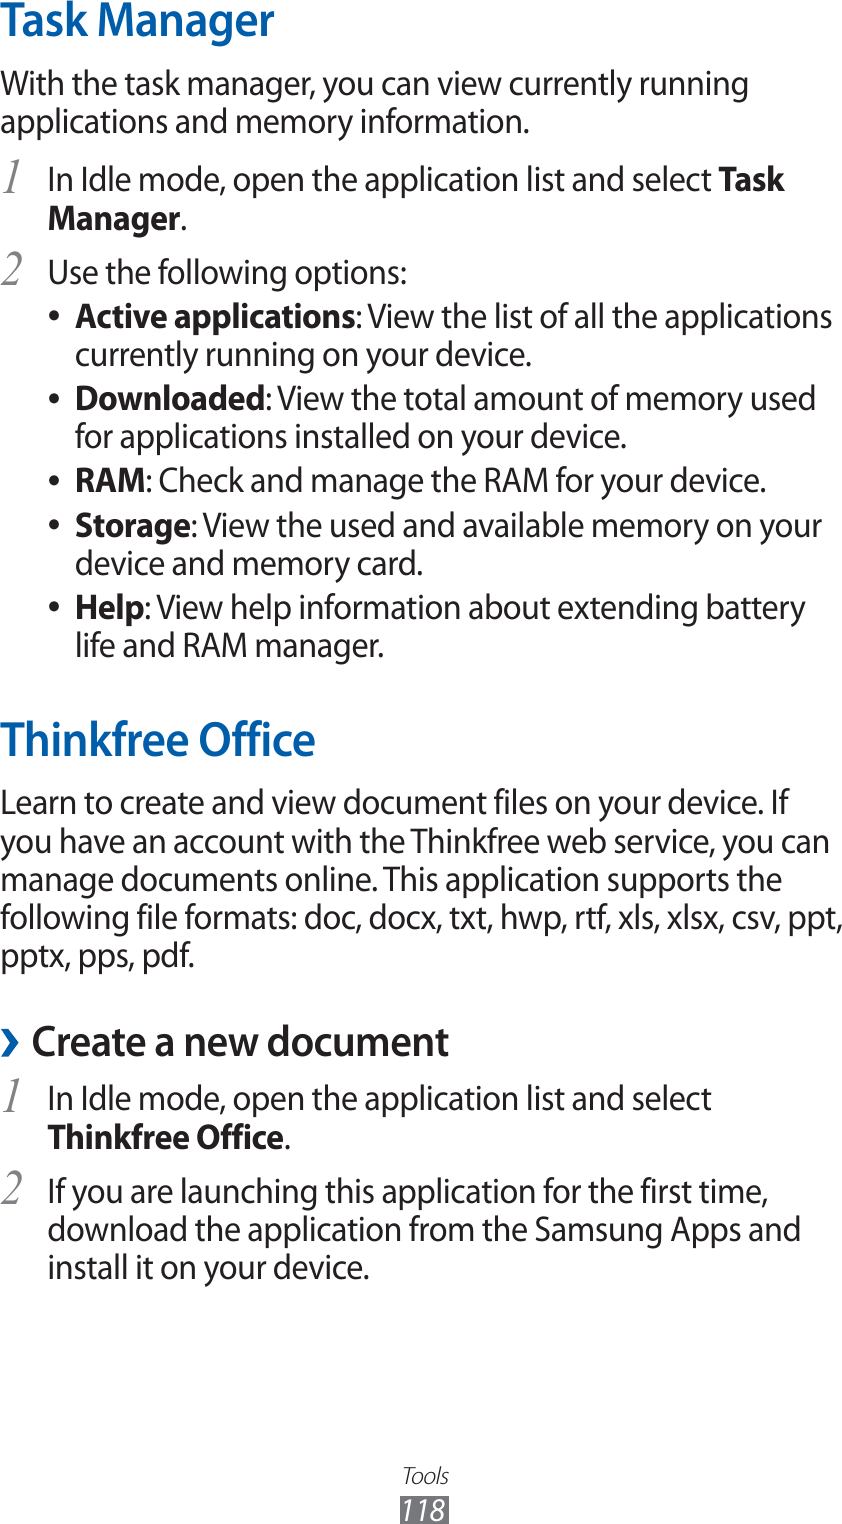 Tools118Task ManagerWith the task manager, you can view currently running applications and memory information.In Idle mode, open the application list and select 1 Task Manager.Use the following options:2 Active applications ●: View the list of all the applications currently running on your device.Downloaded ●: View the total amount of memory used for applications installed on your device.RAM ●: Check and manage the RAM for your device.Storage ●: View the used and available memory on your device and memory card.Help ●: View help information about extending battery life and RAM manager.Thinkfree OfficeLearn to create and view document files on your device. If you have an account with the Thinkfree web service, you can manage documents online. This application supports the following file formats: doc, docx, txt, hwp, rtf, xls, xlsx, csv, ppt, pptx, pps, pdf.Create a new document ›In Idle mode, open the application list and select 1 Thinkfree Office.If you are launching this application for the first time, 2 download the application from the Samsung Apps and install it on your device.